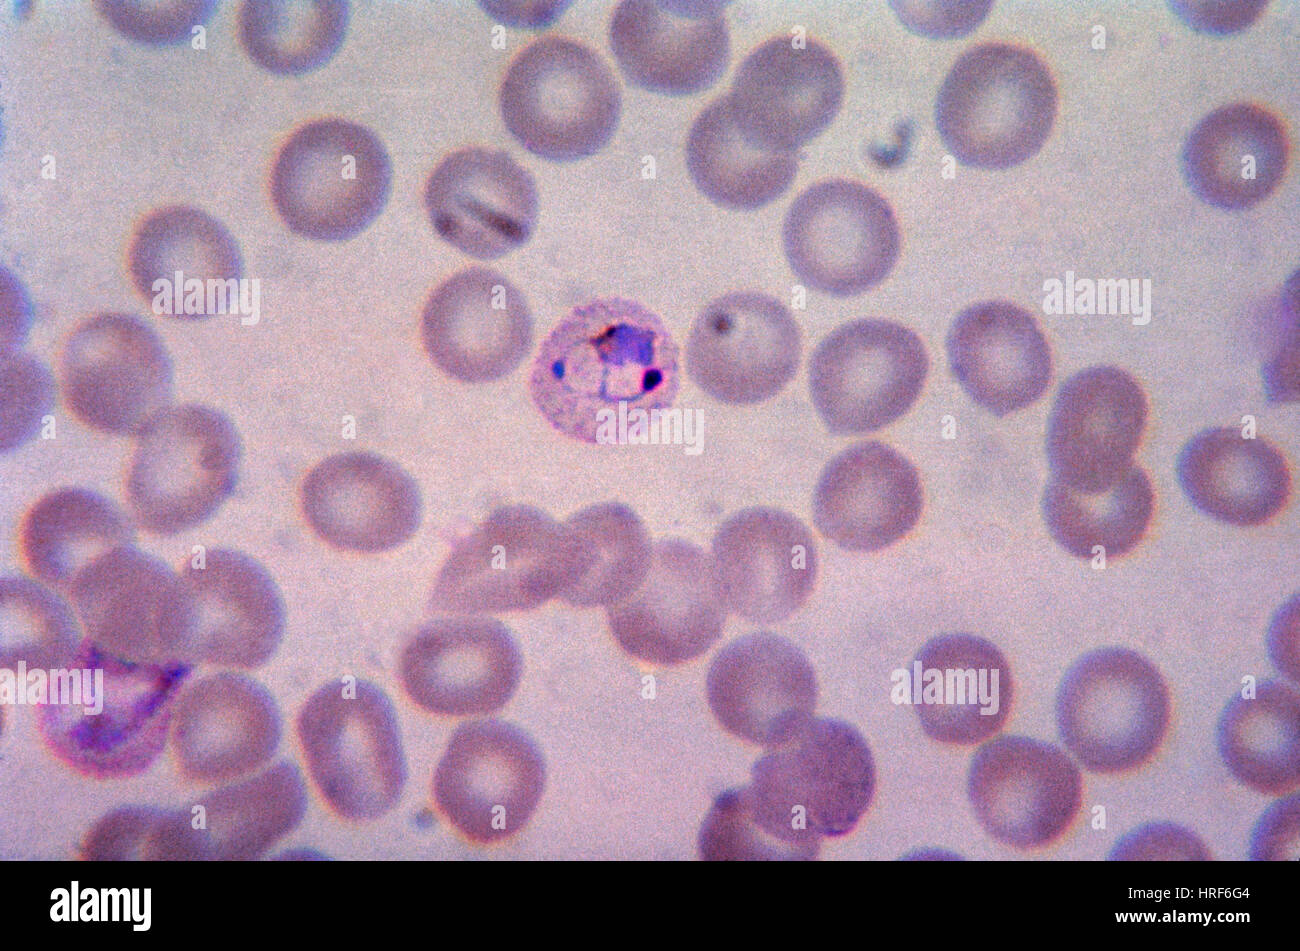 Schuffner's Dots (Malaria), LM Stock Photo